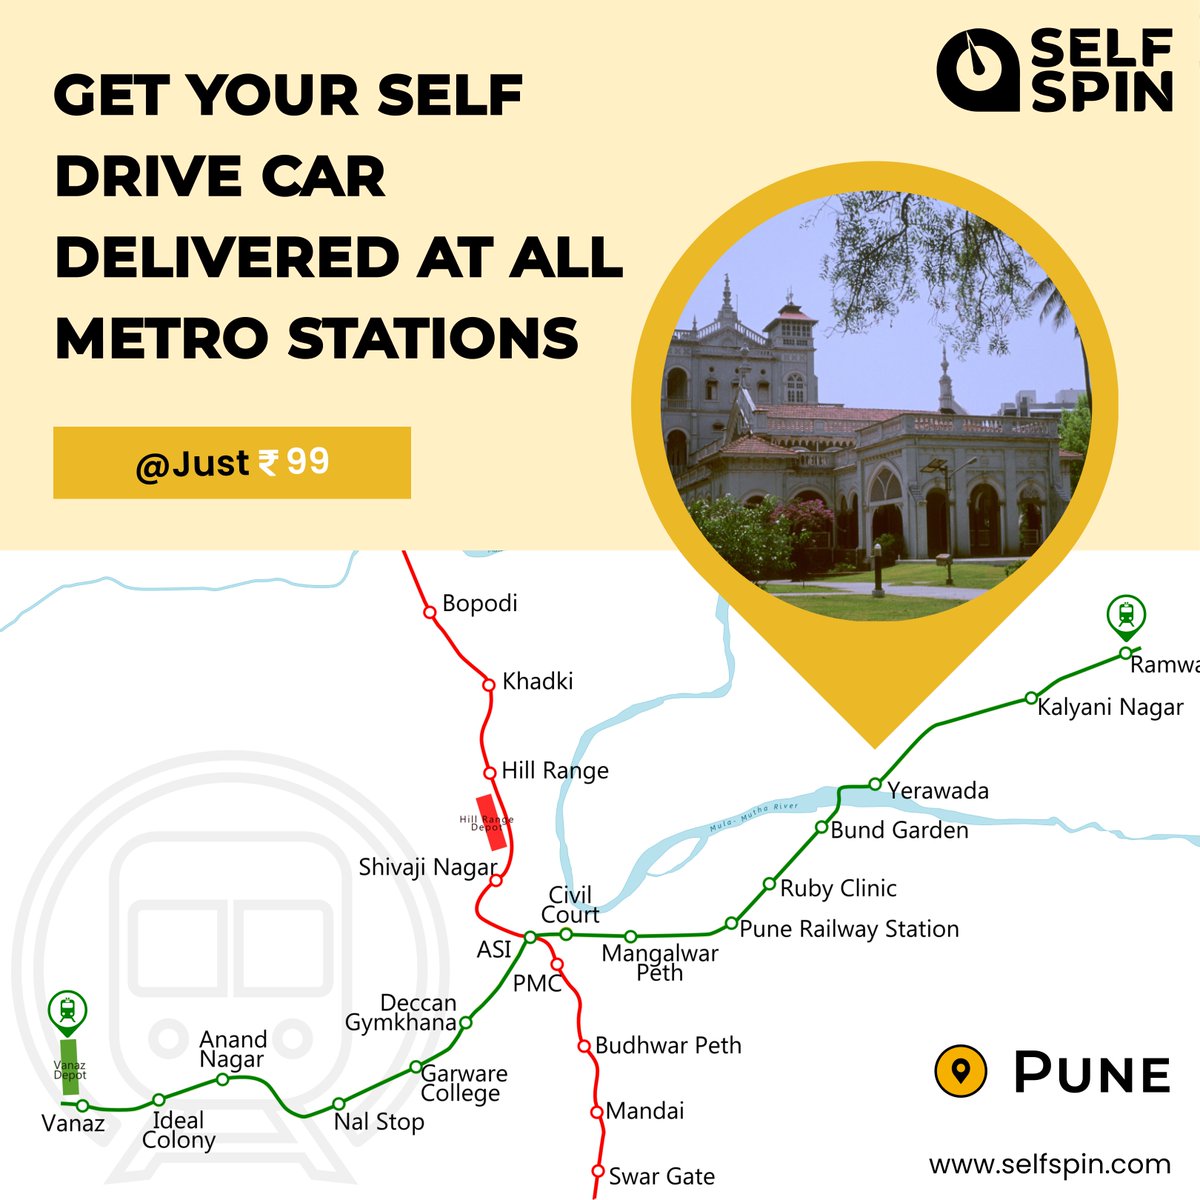 Experience Freedom: Your Self-Drive Car Awaits at Every Metro Station!🚗🚇

#SelfSpin #Pune #Bengaluru #RentalServices #CarRental #BookNow #Metro #PuneMetro #PublicTransport #ConvenientCommute #MetroRide #SelfDrive #AnytimeAnywhere